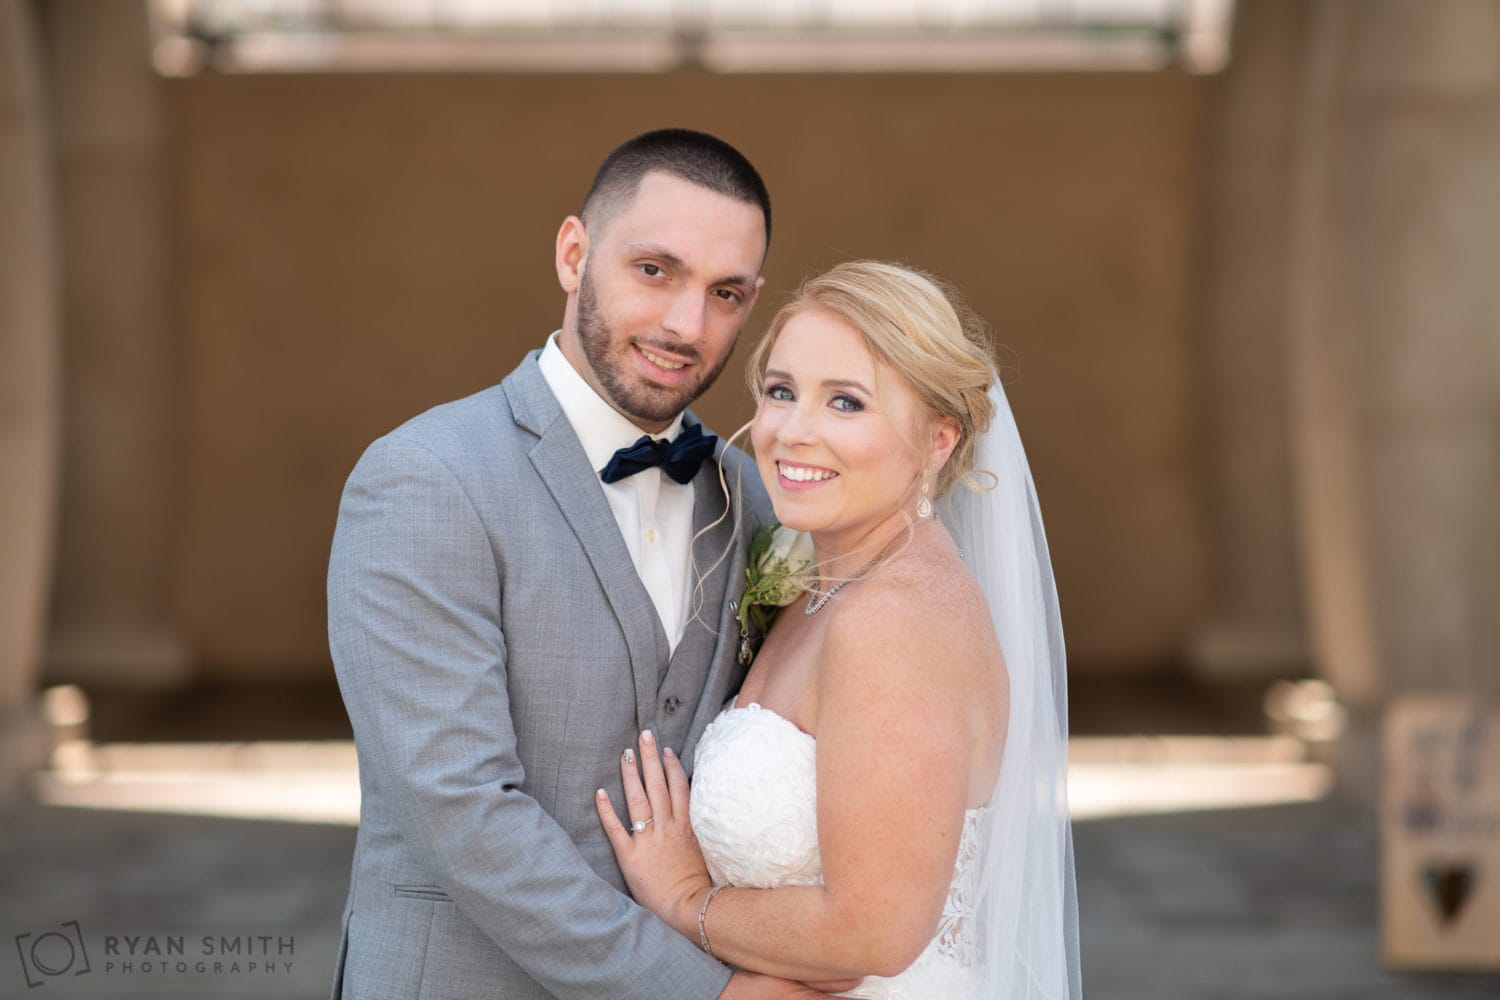 Portraits of the bride and groom after the first look - 21 Main Events - North Myrtle Beach